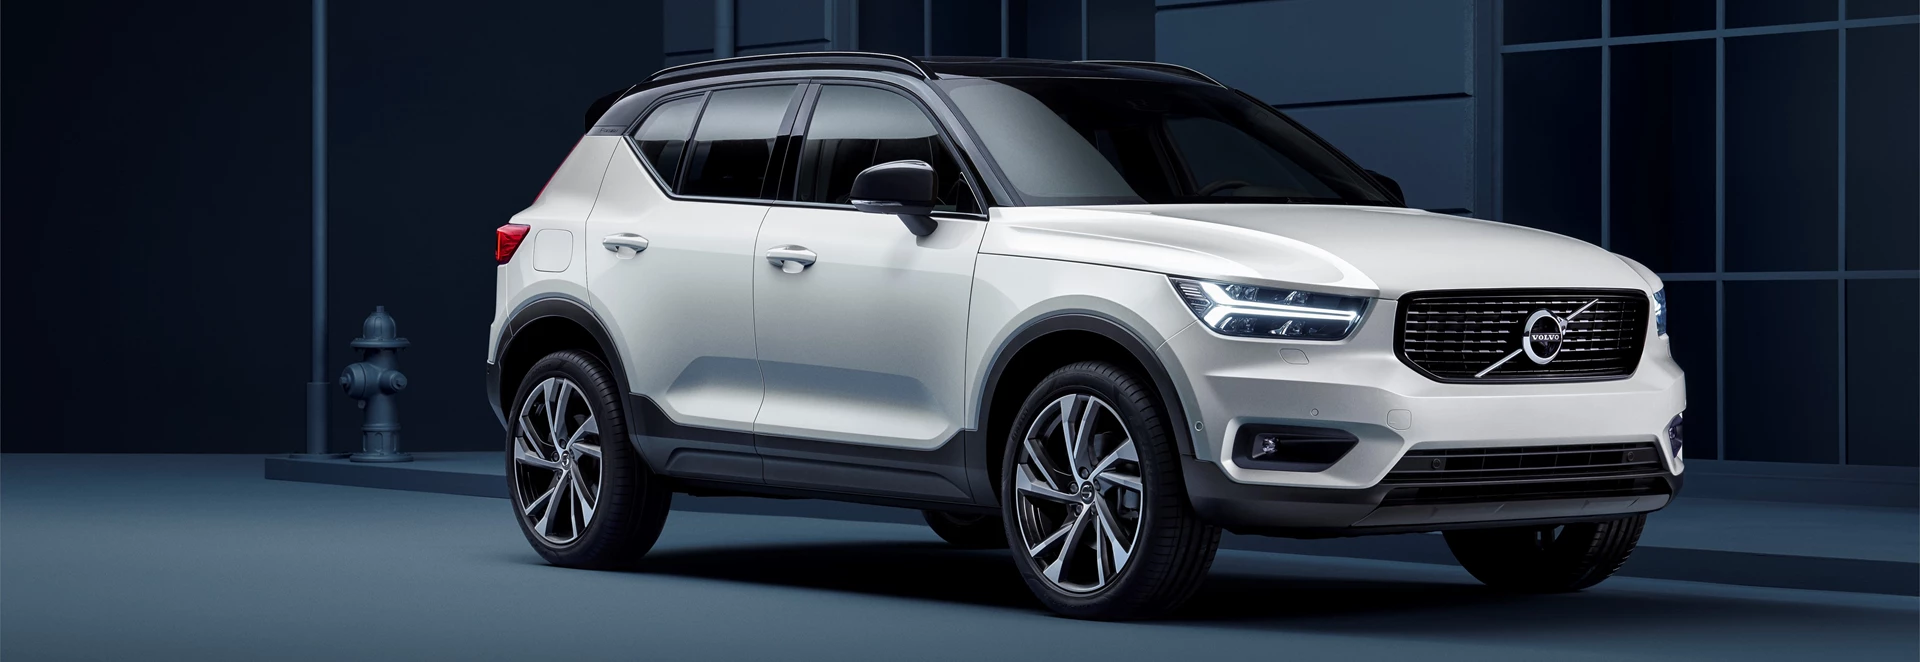 Volvo unveils XC40 compact SUV - pricing starts from £27,905 